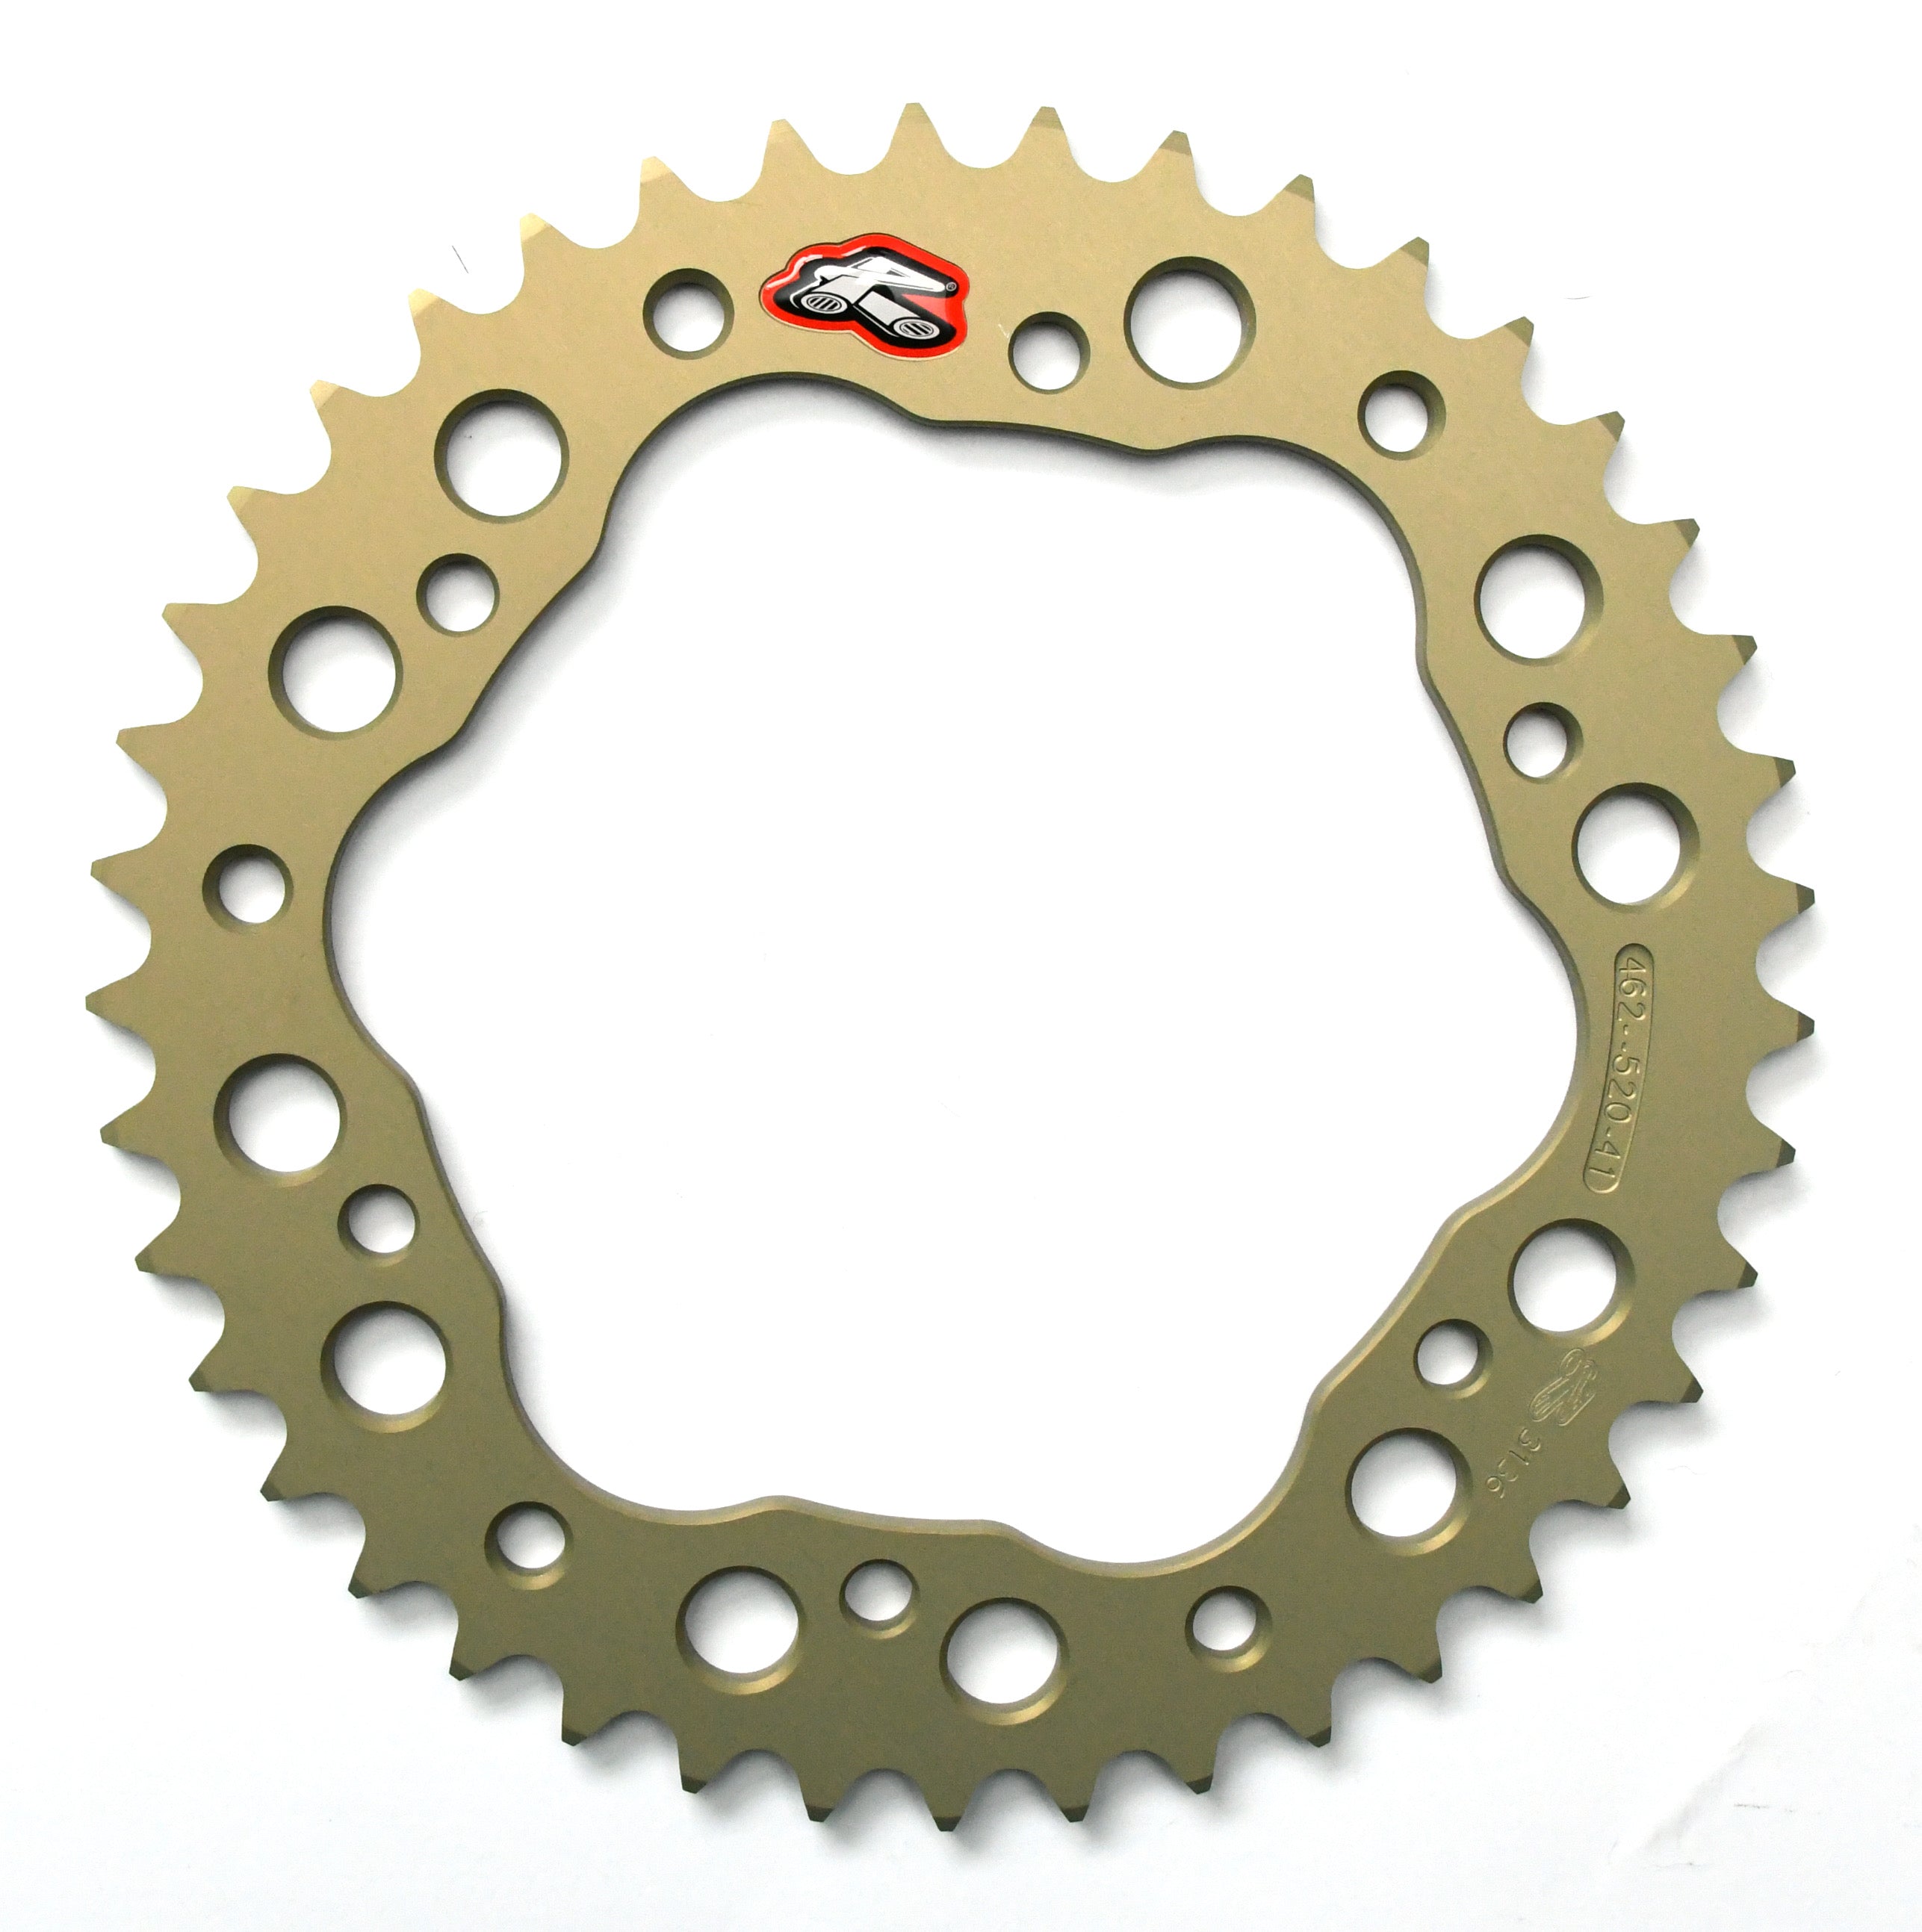 Renthal 520 Hard Anodised Rear Sprocket 462-520 - Choose your Gearing